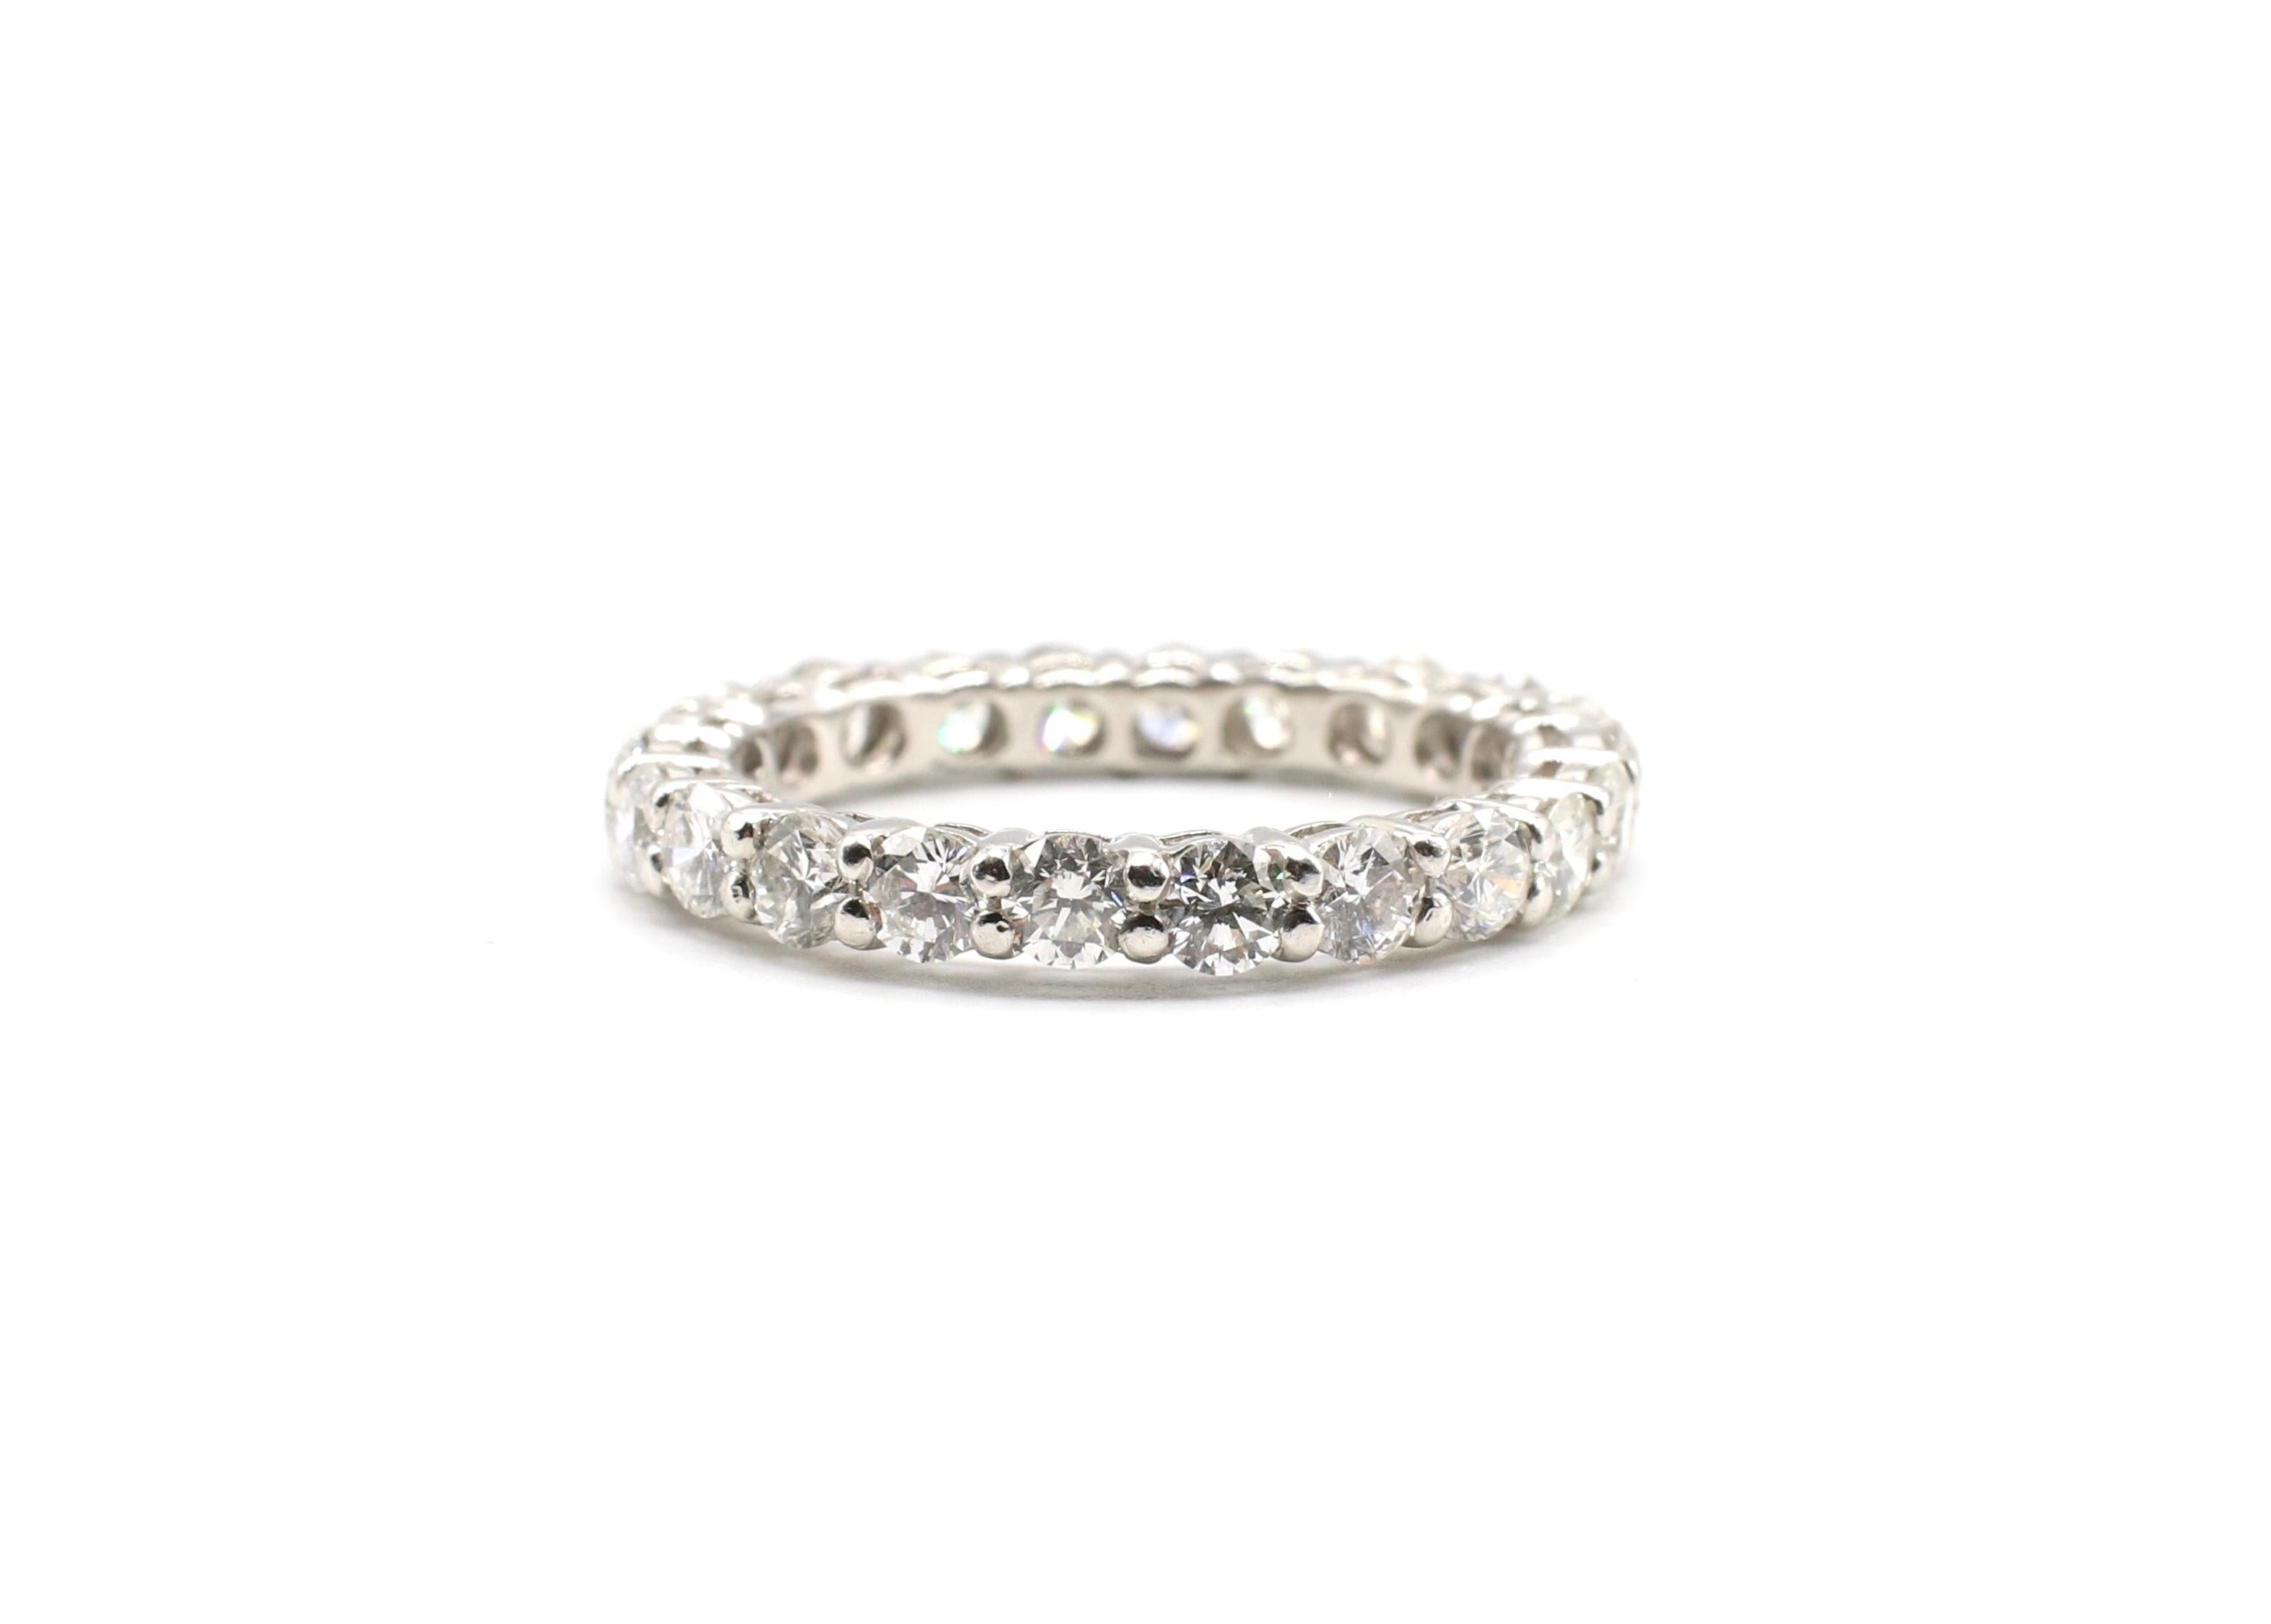 Vintage Platinum Round Brilliant Cut Diamond Eternity Band Ring 2.5 CTW Size 8.5

Metal: Platinum, marked PT900
Weight: 5.11 grams
Diamonds: 22 round brilliant cut diamonds, approx. 2.5 ctw G-H VS. 
Size: 8.5
Width: 3.1mm wide 
Recently polished